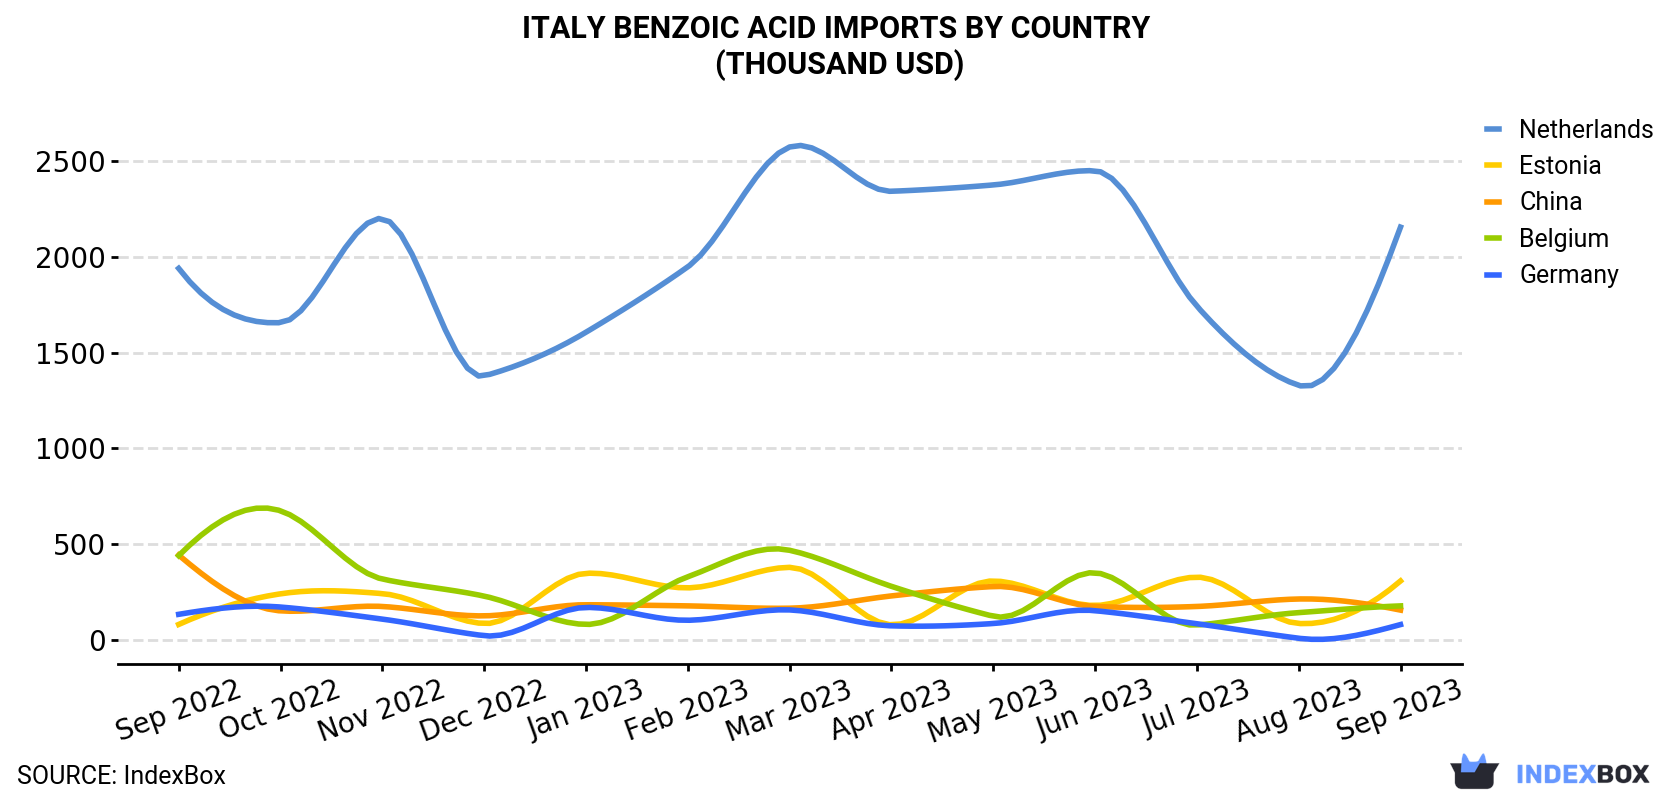 Italy Benzoic Acid Imports By Country (Thousand USD)